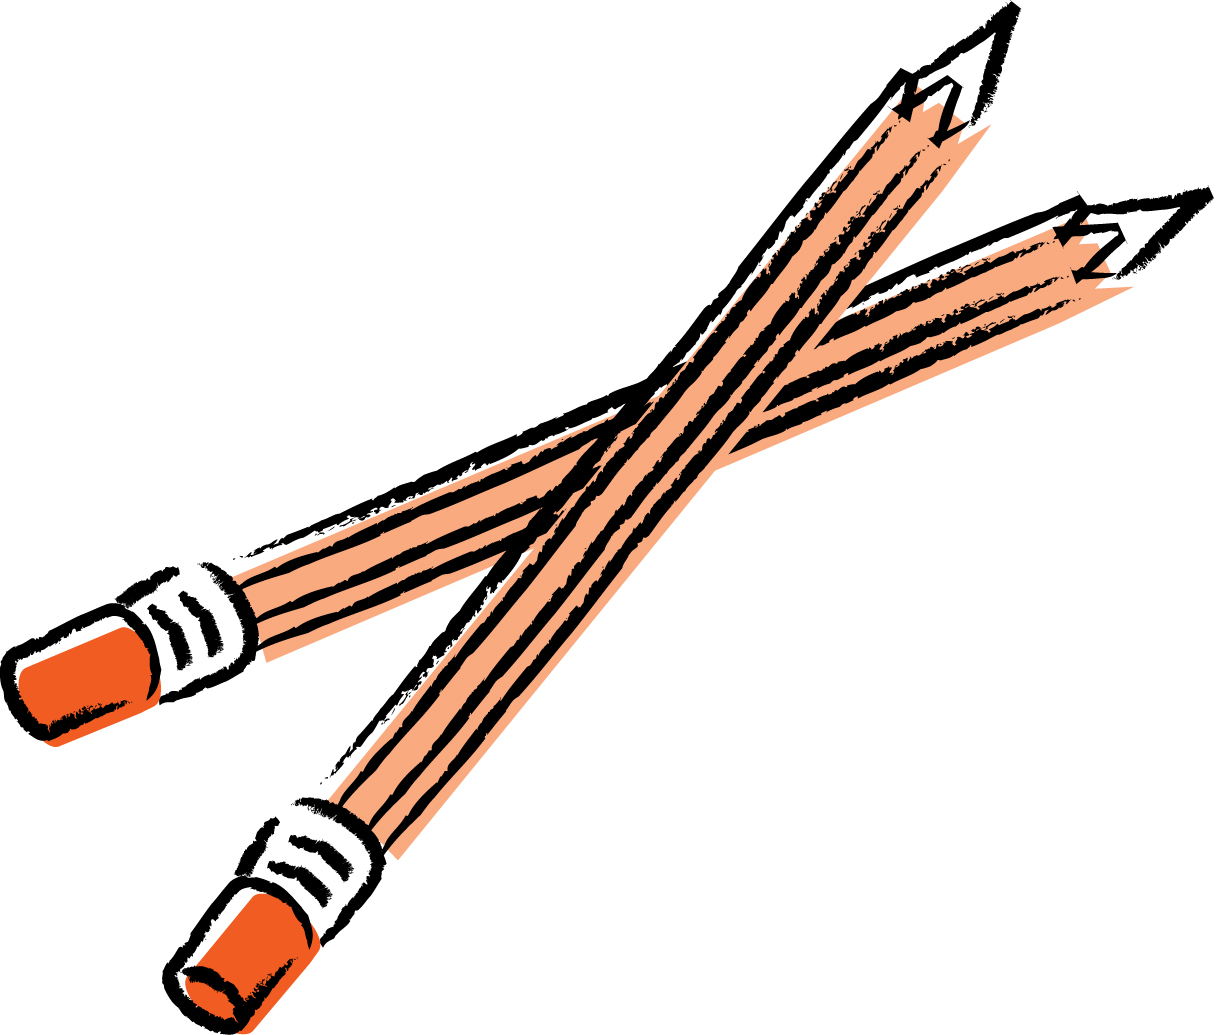 Pencil Writing Clipart | Clipart Panda - Free Clipart Images